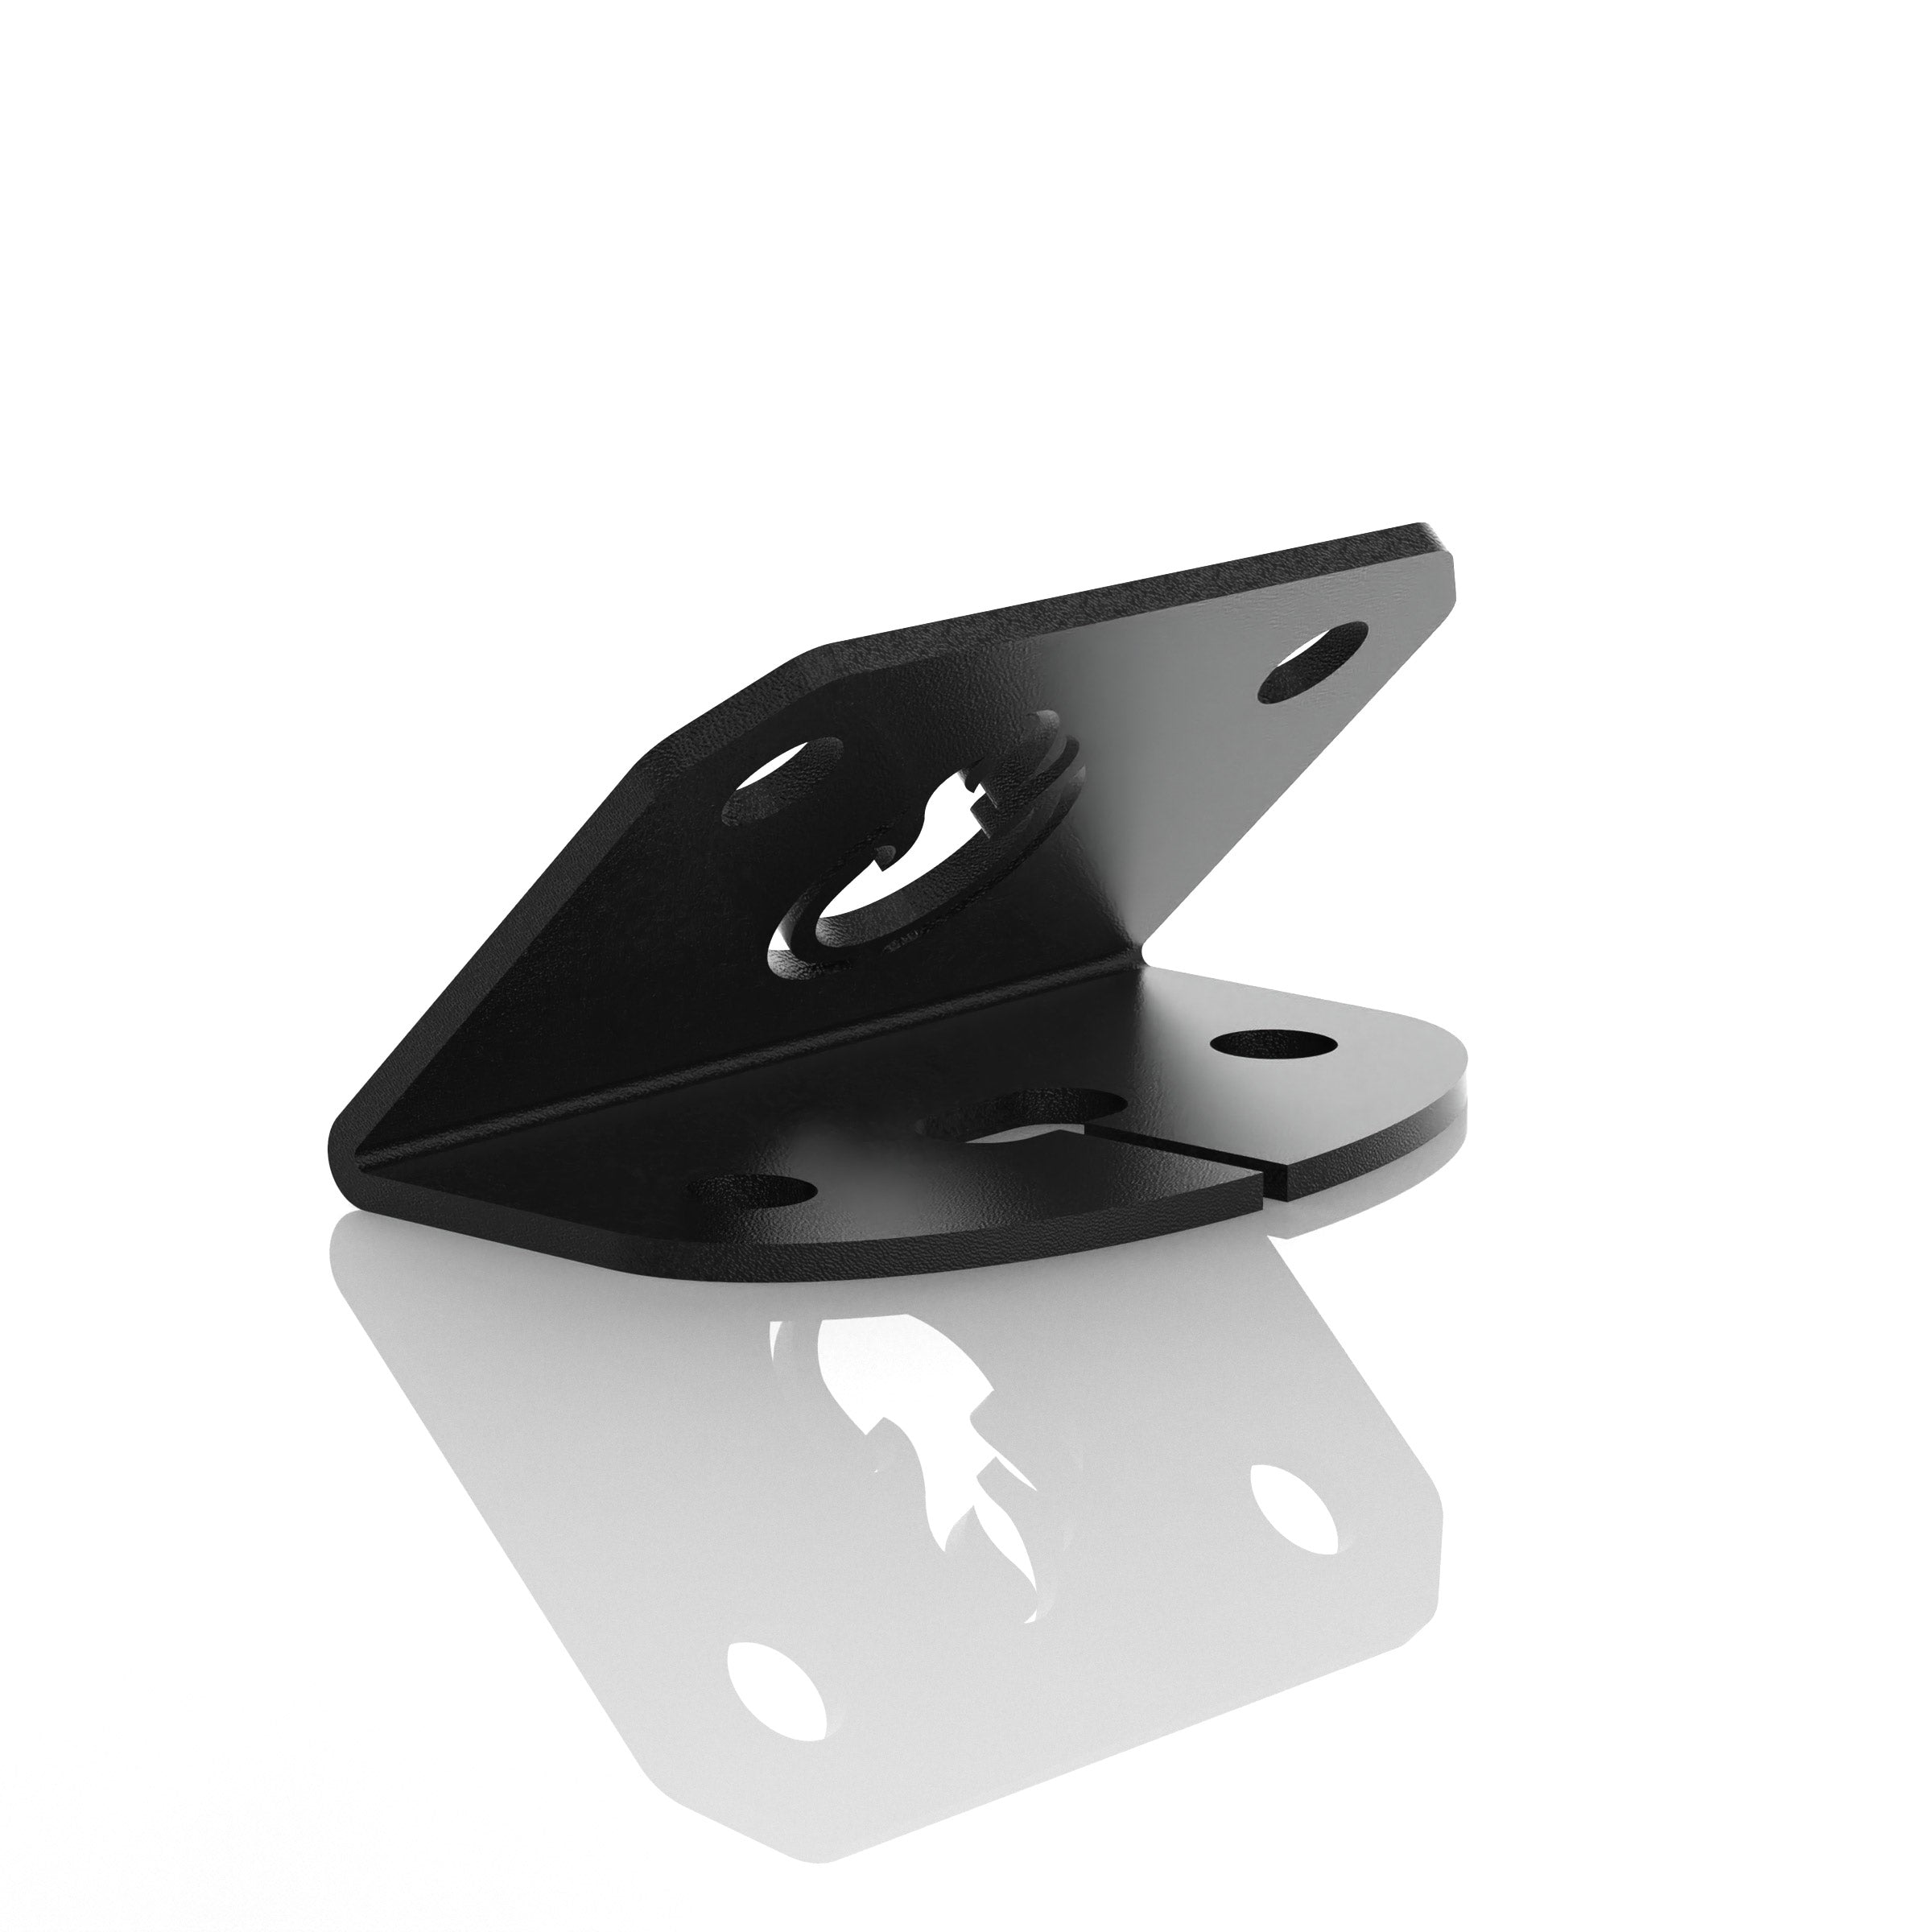 Litt Industries halo billet 45 degree bracket Easily mount rock or accessory lights with our mounting brackets Each mount is powder coated black Hardware included